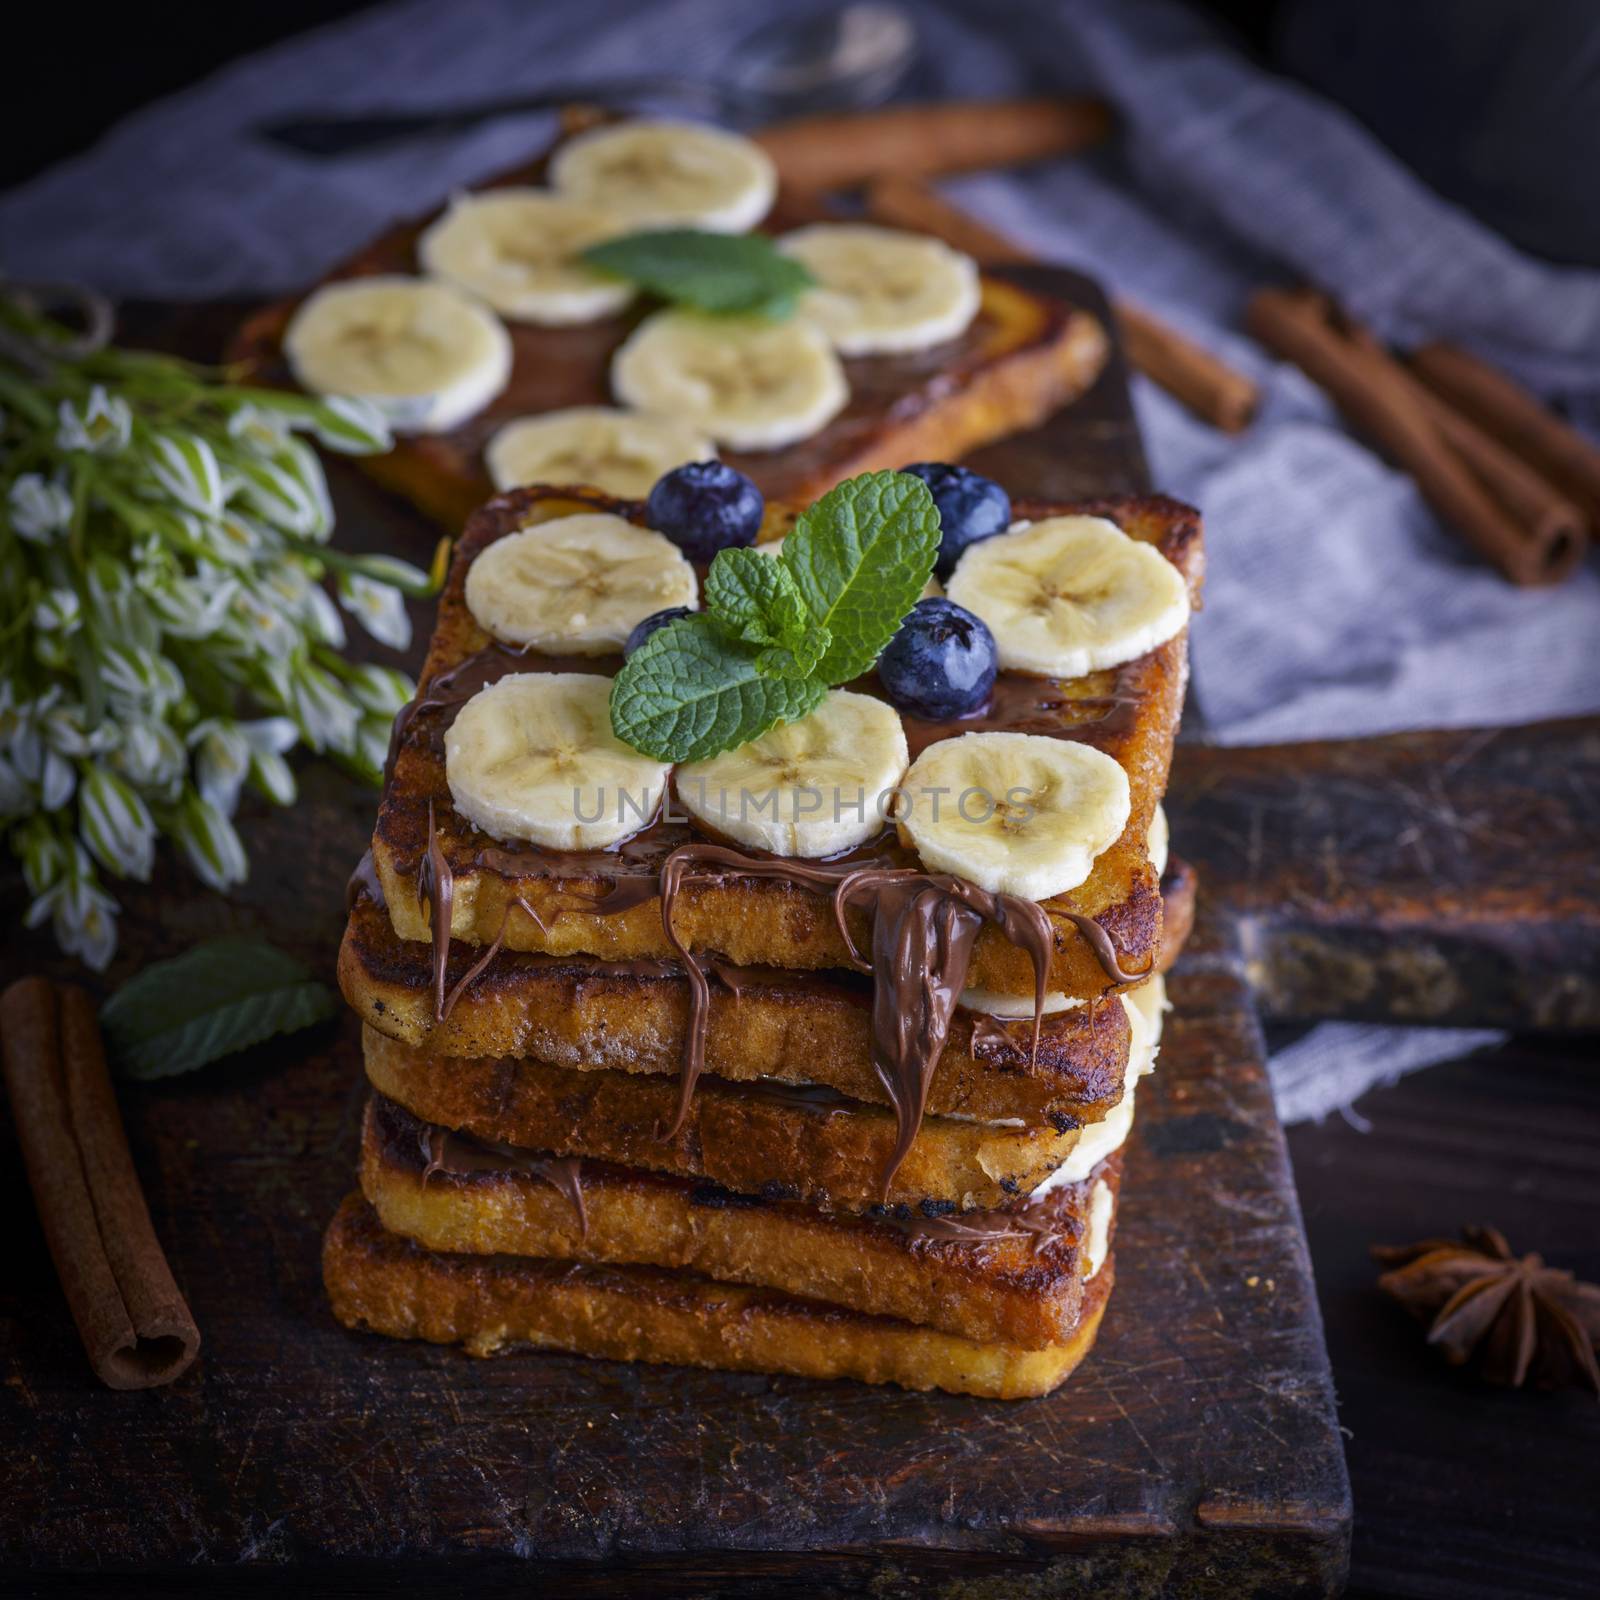 a pile of square fried bread slices with chocolate and banana  by ndanko